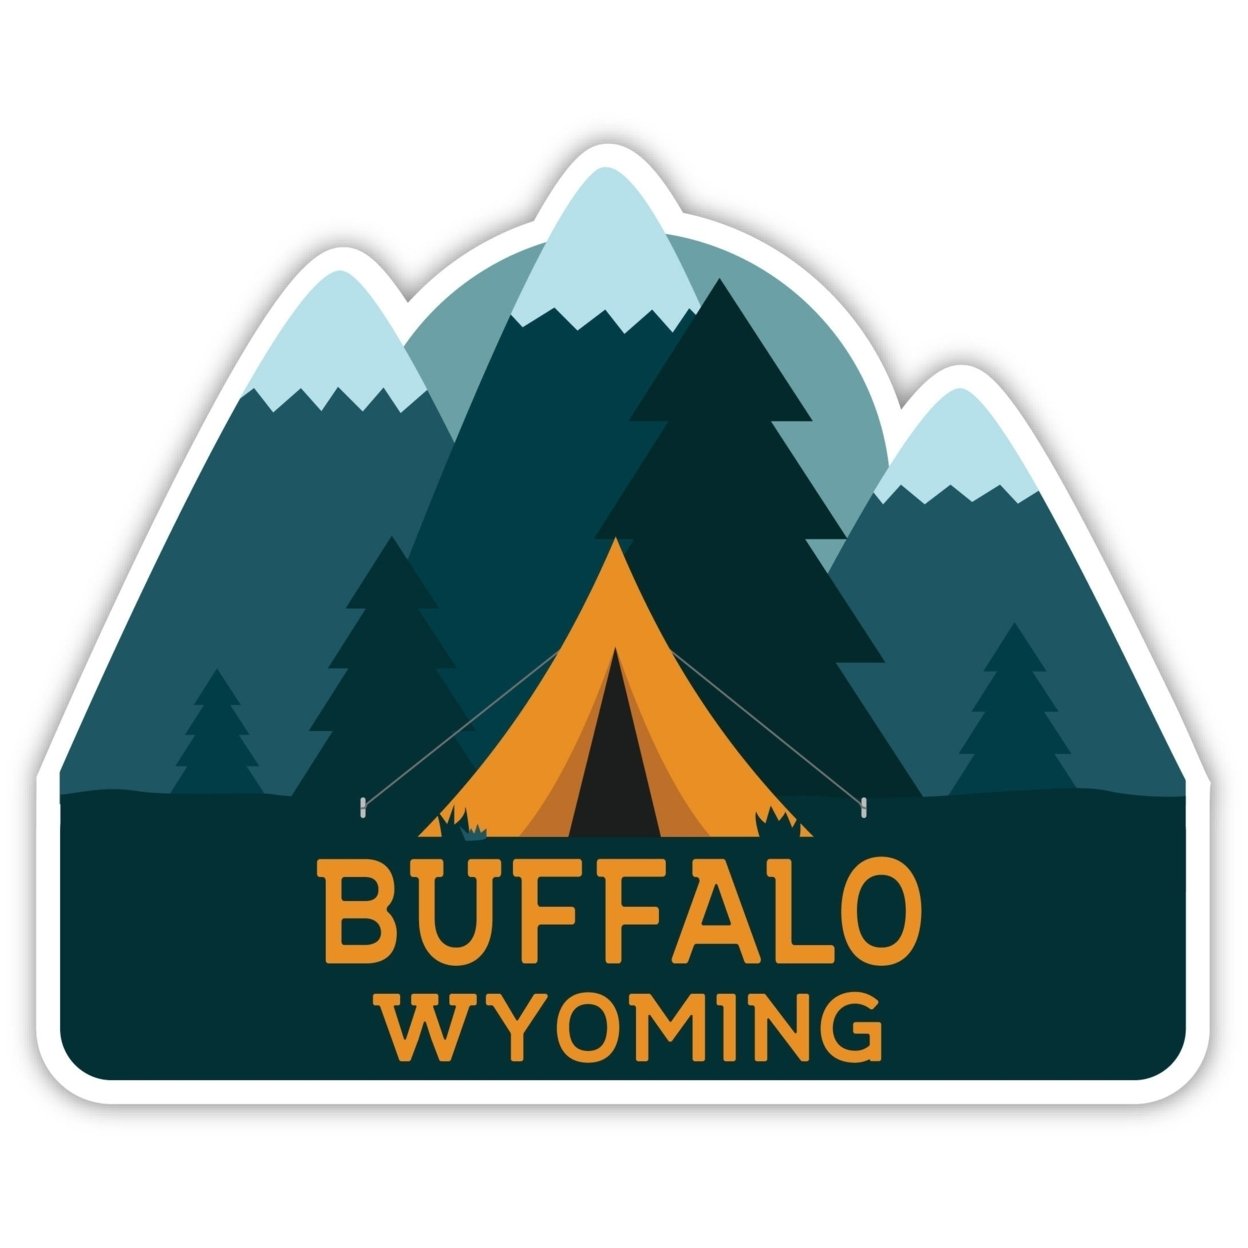 Buffalo Wyoming Souvenir Decorative Stickers (Choose Theme And Size) - 4-Pack, 2-Inch, Tent